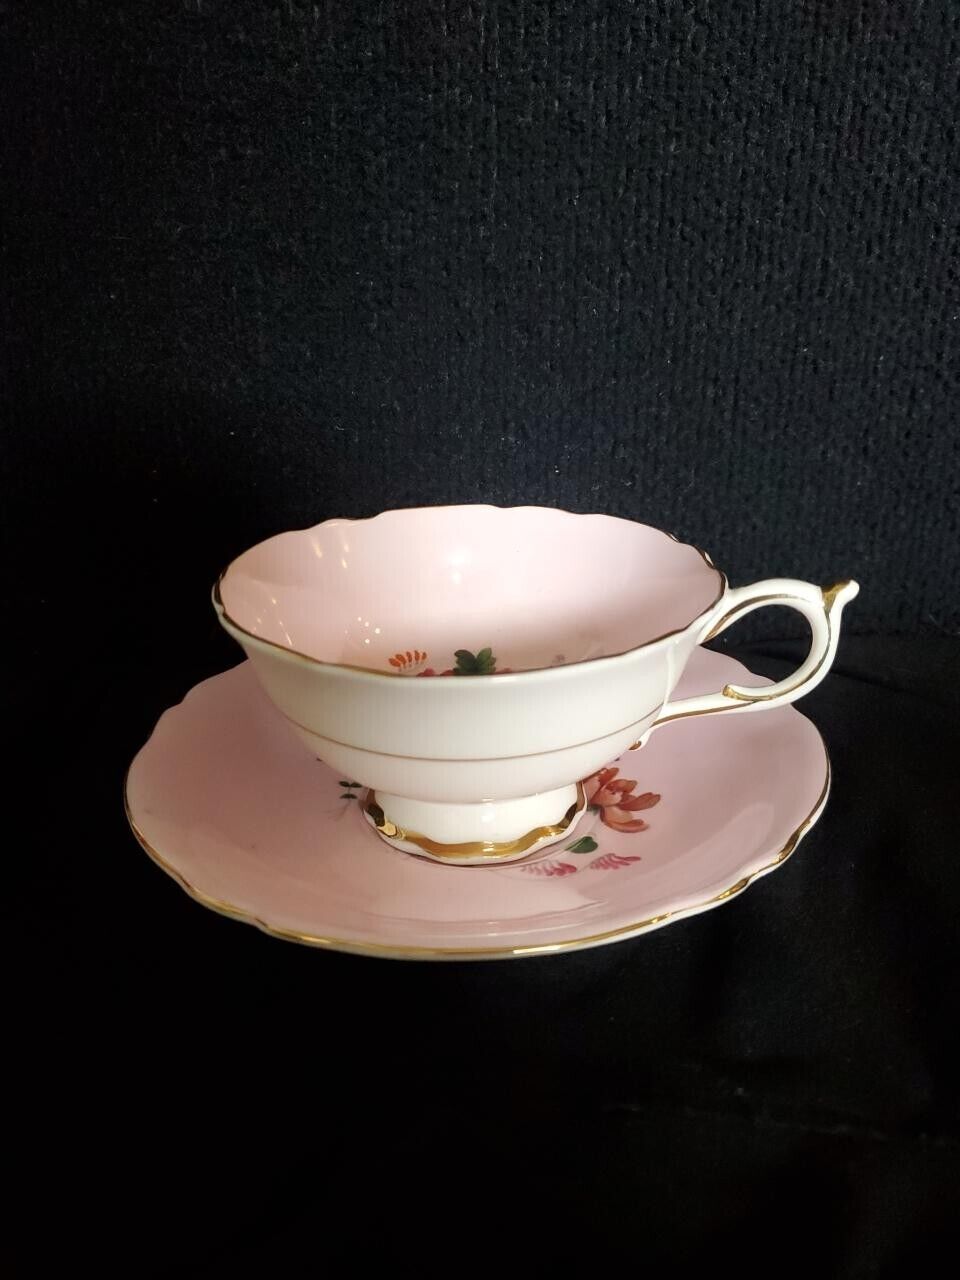 Vintage PARAGON Tea Cup and Saucer. Bone China made in England